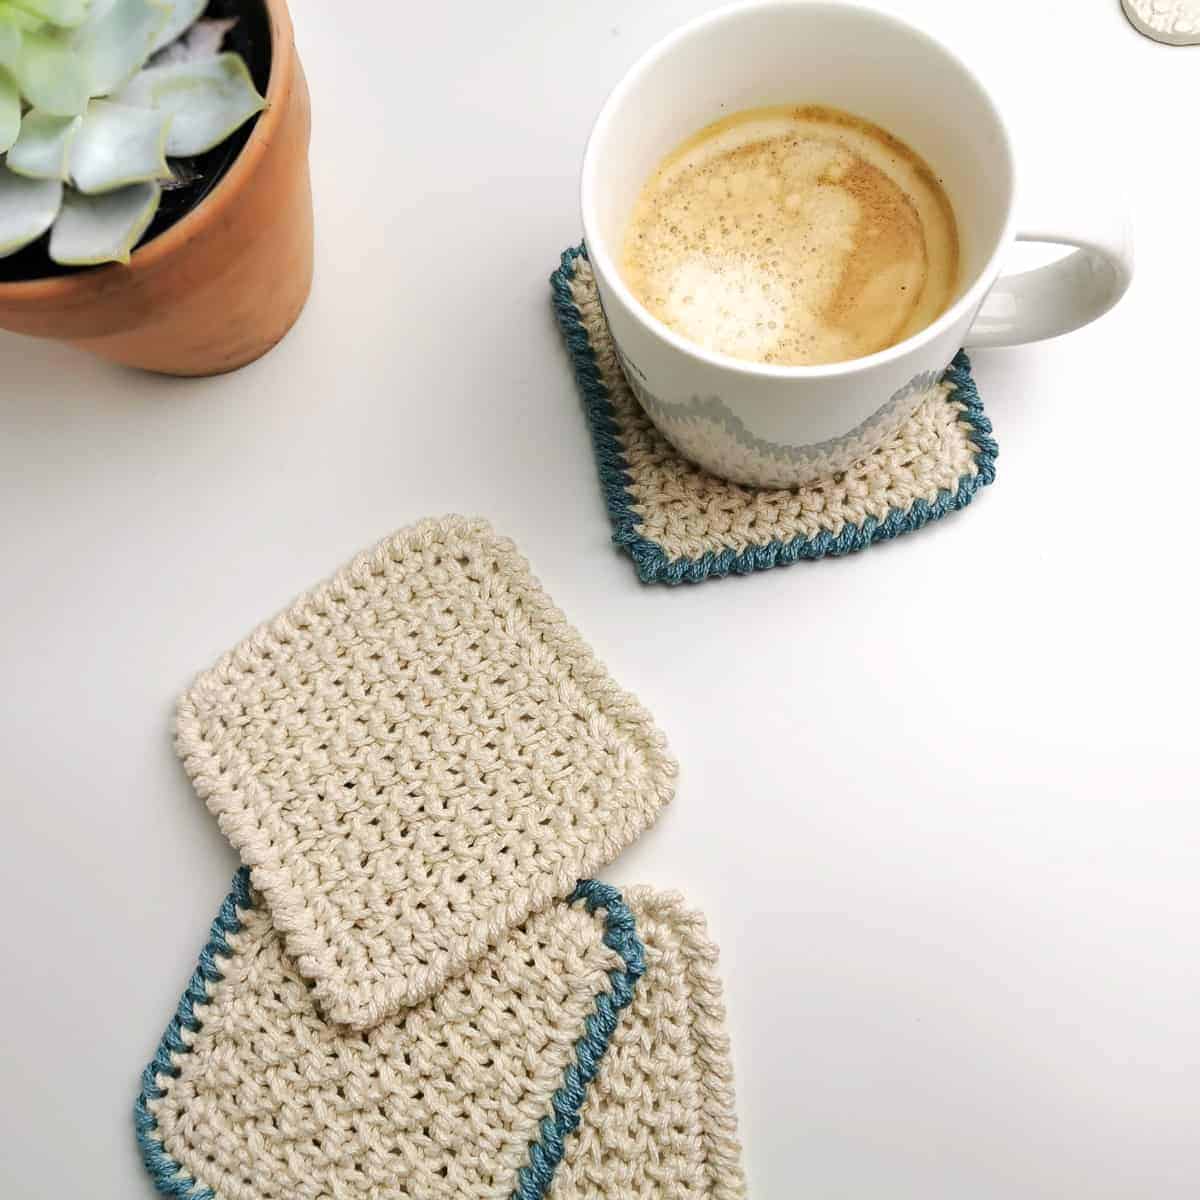 8 Easy Crochet Coaster and Pot Holder Patterns